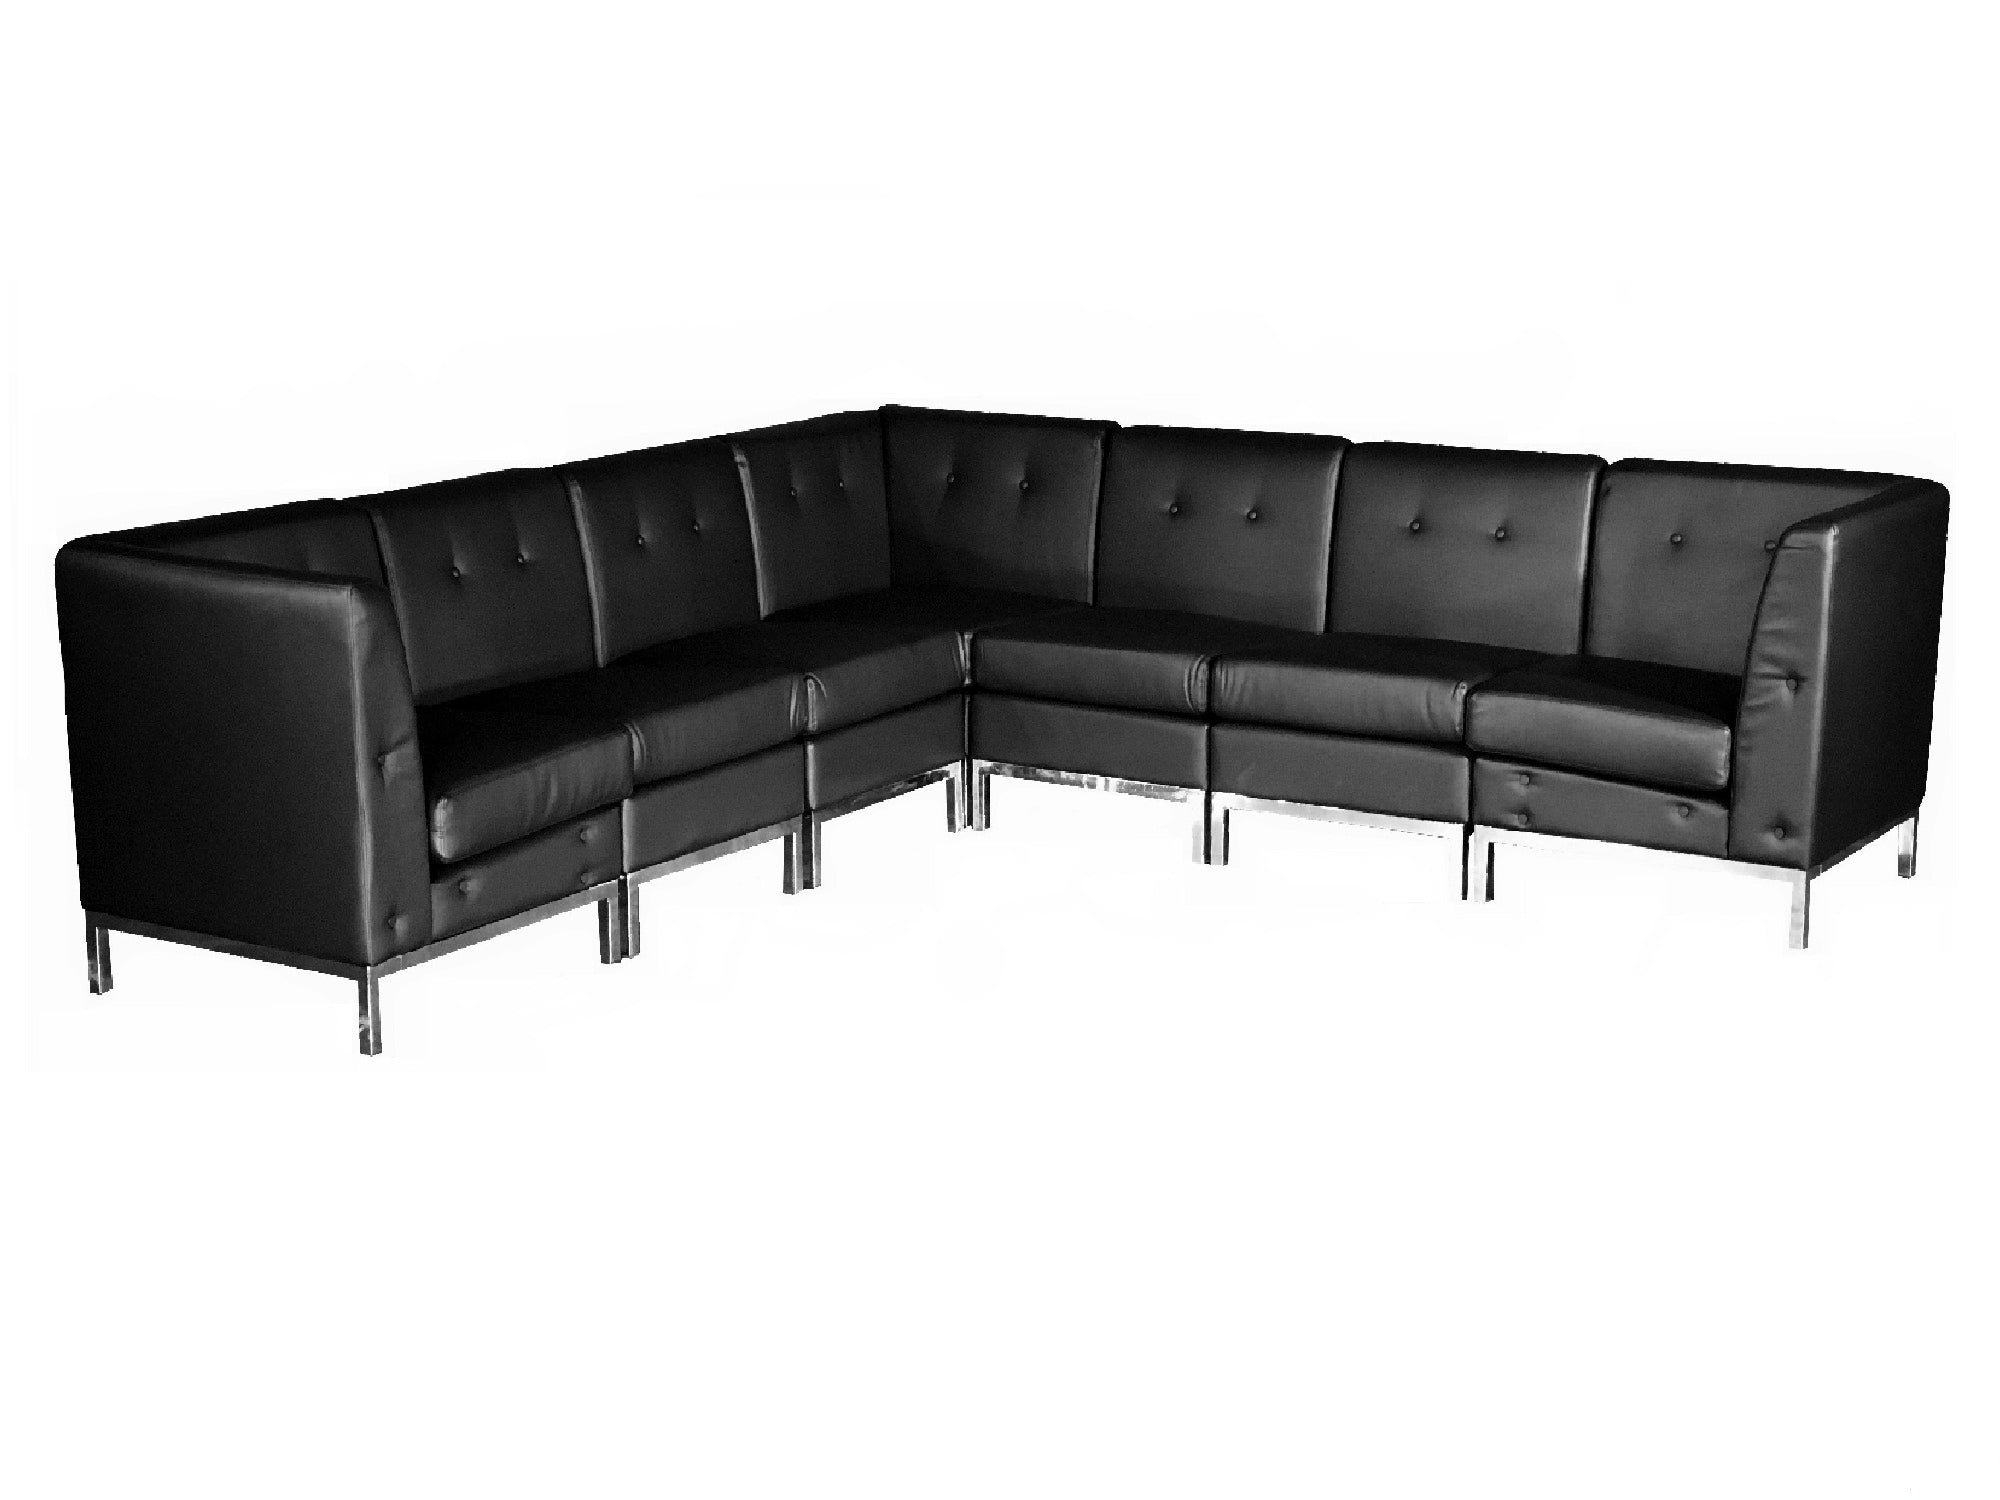 PEACHTREE 7PC "L" SHAPED SECTIONAL - BLACK